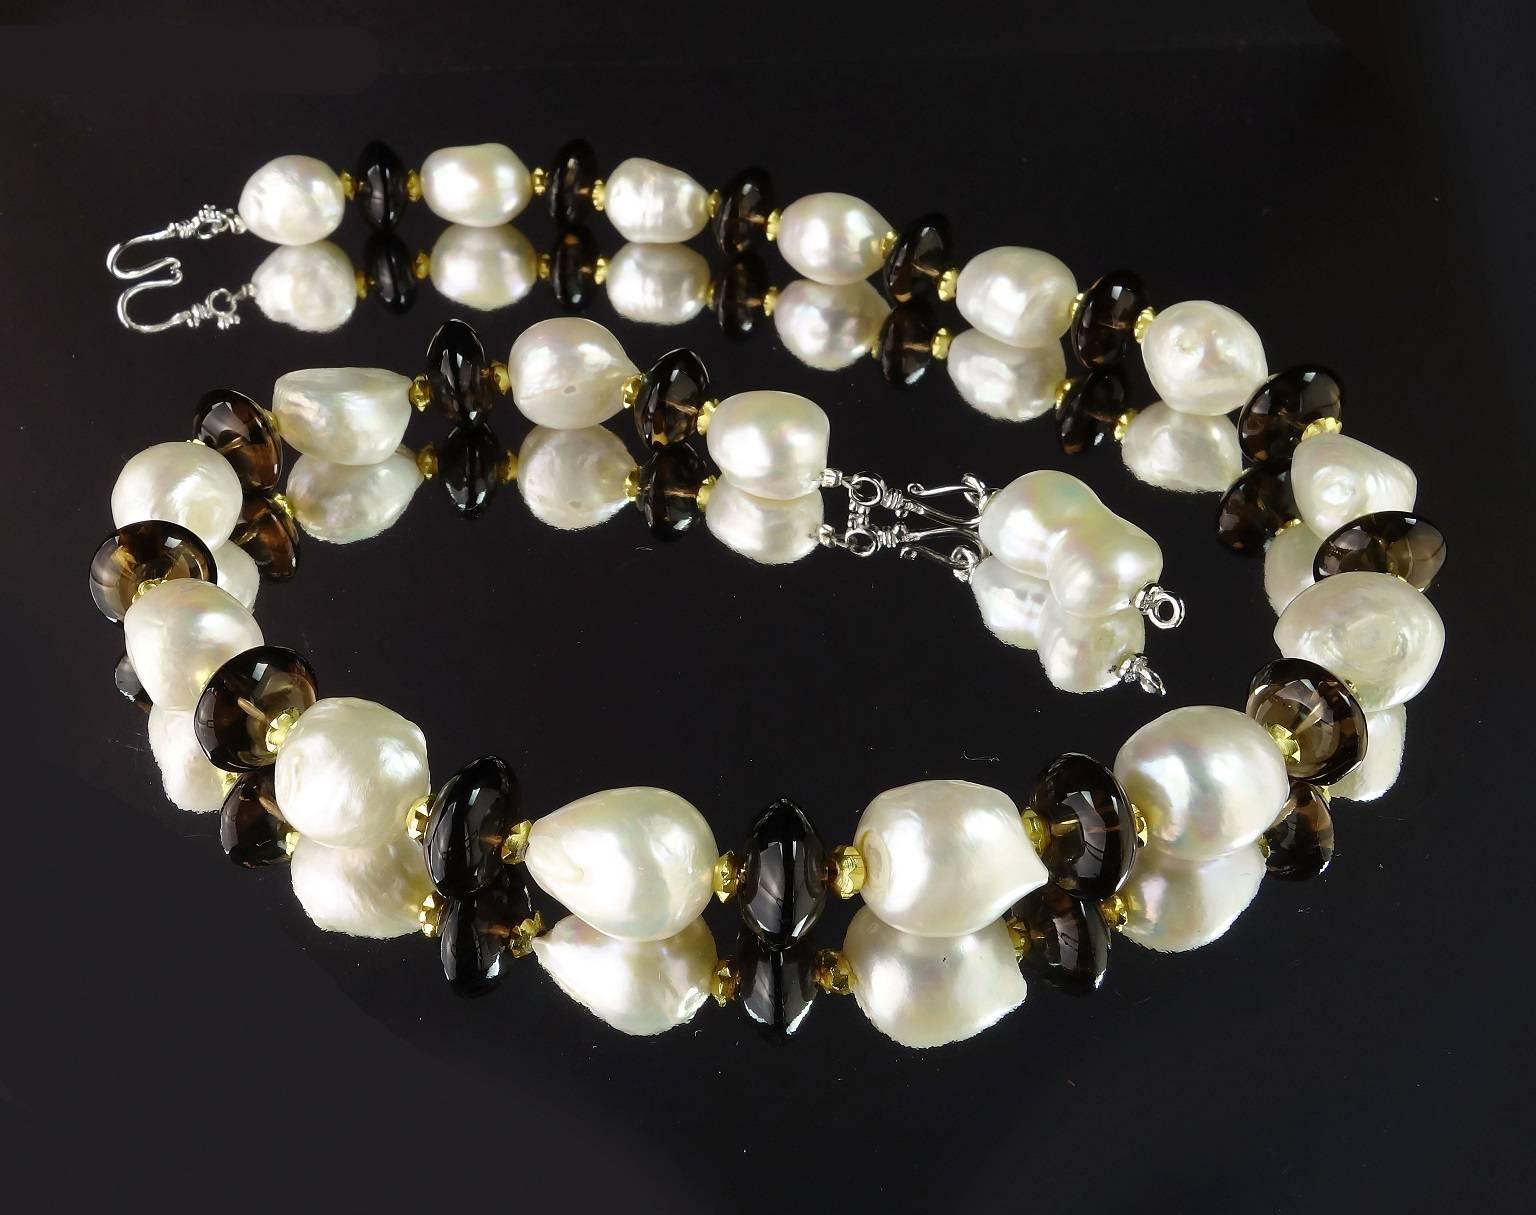 Classic Necklace of White Pearls and Smoky Quartz Rondelles with gold tone accents perfect for all occasions.  This lovely necklace is 18.5 inches in length.   This features a pearl clasp that can be a focal.  The pearls are 11-12mm.  
